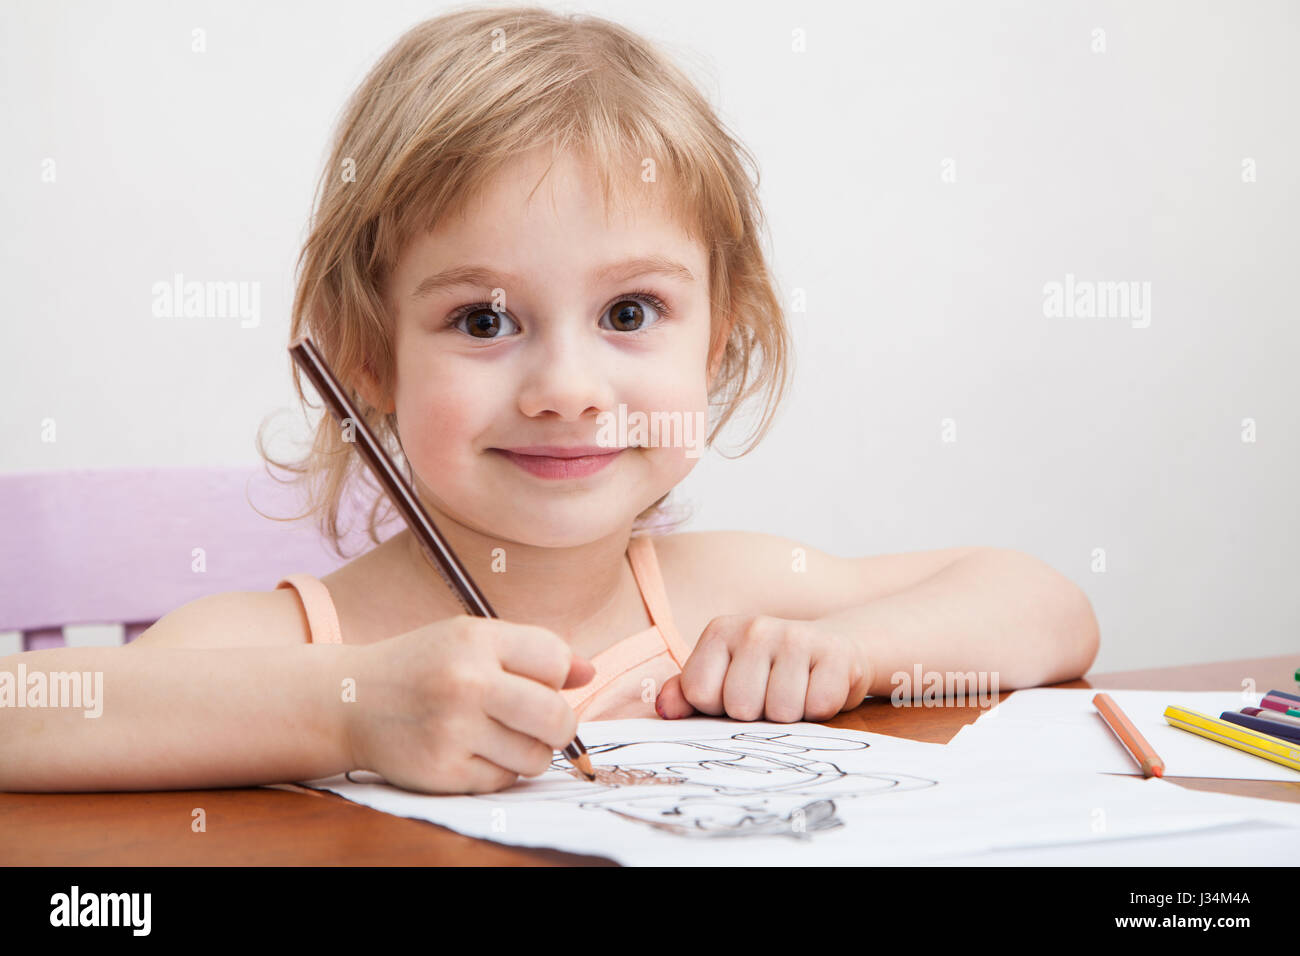 https://c8.alamy.com/comp/J34M4A/little-girl-drawing-with-colored-pencils-on-paper-J34M4A.jpg